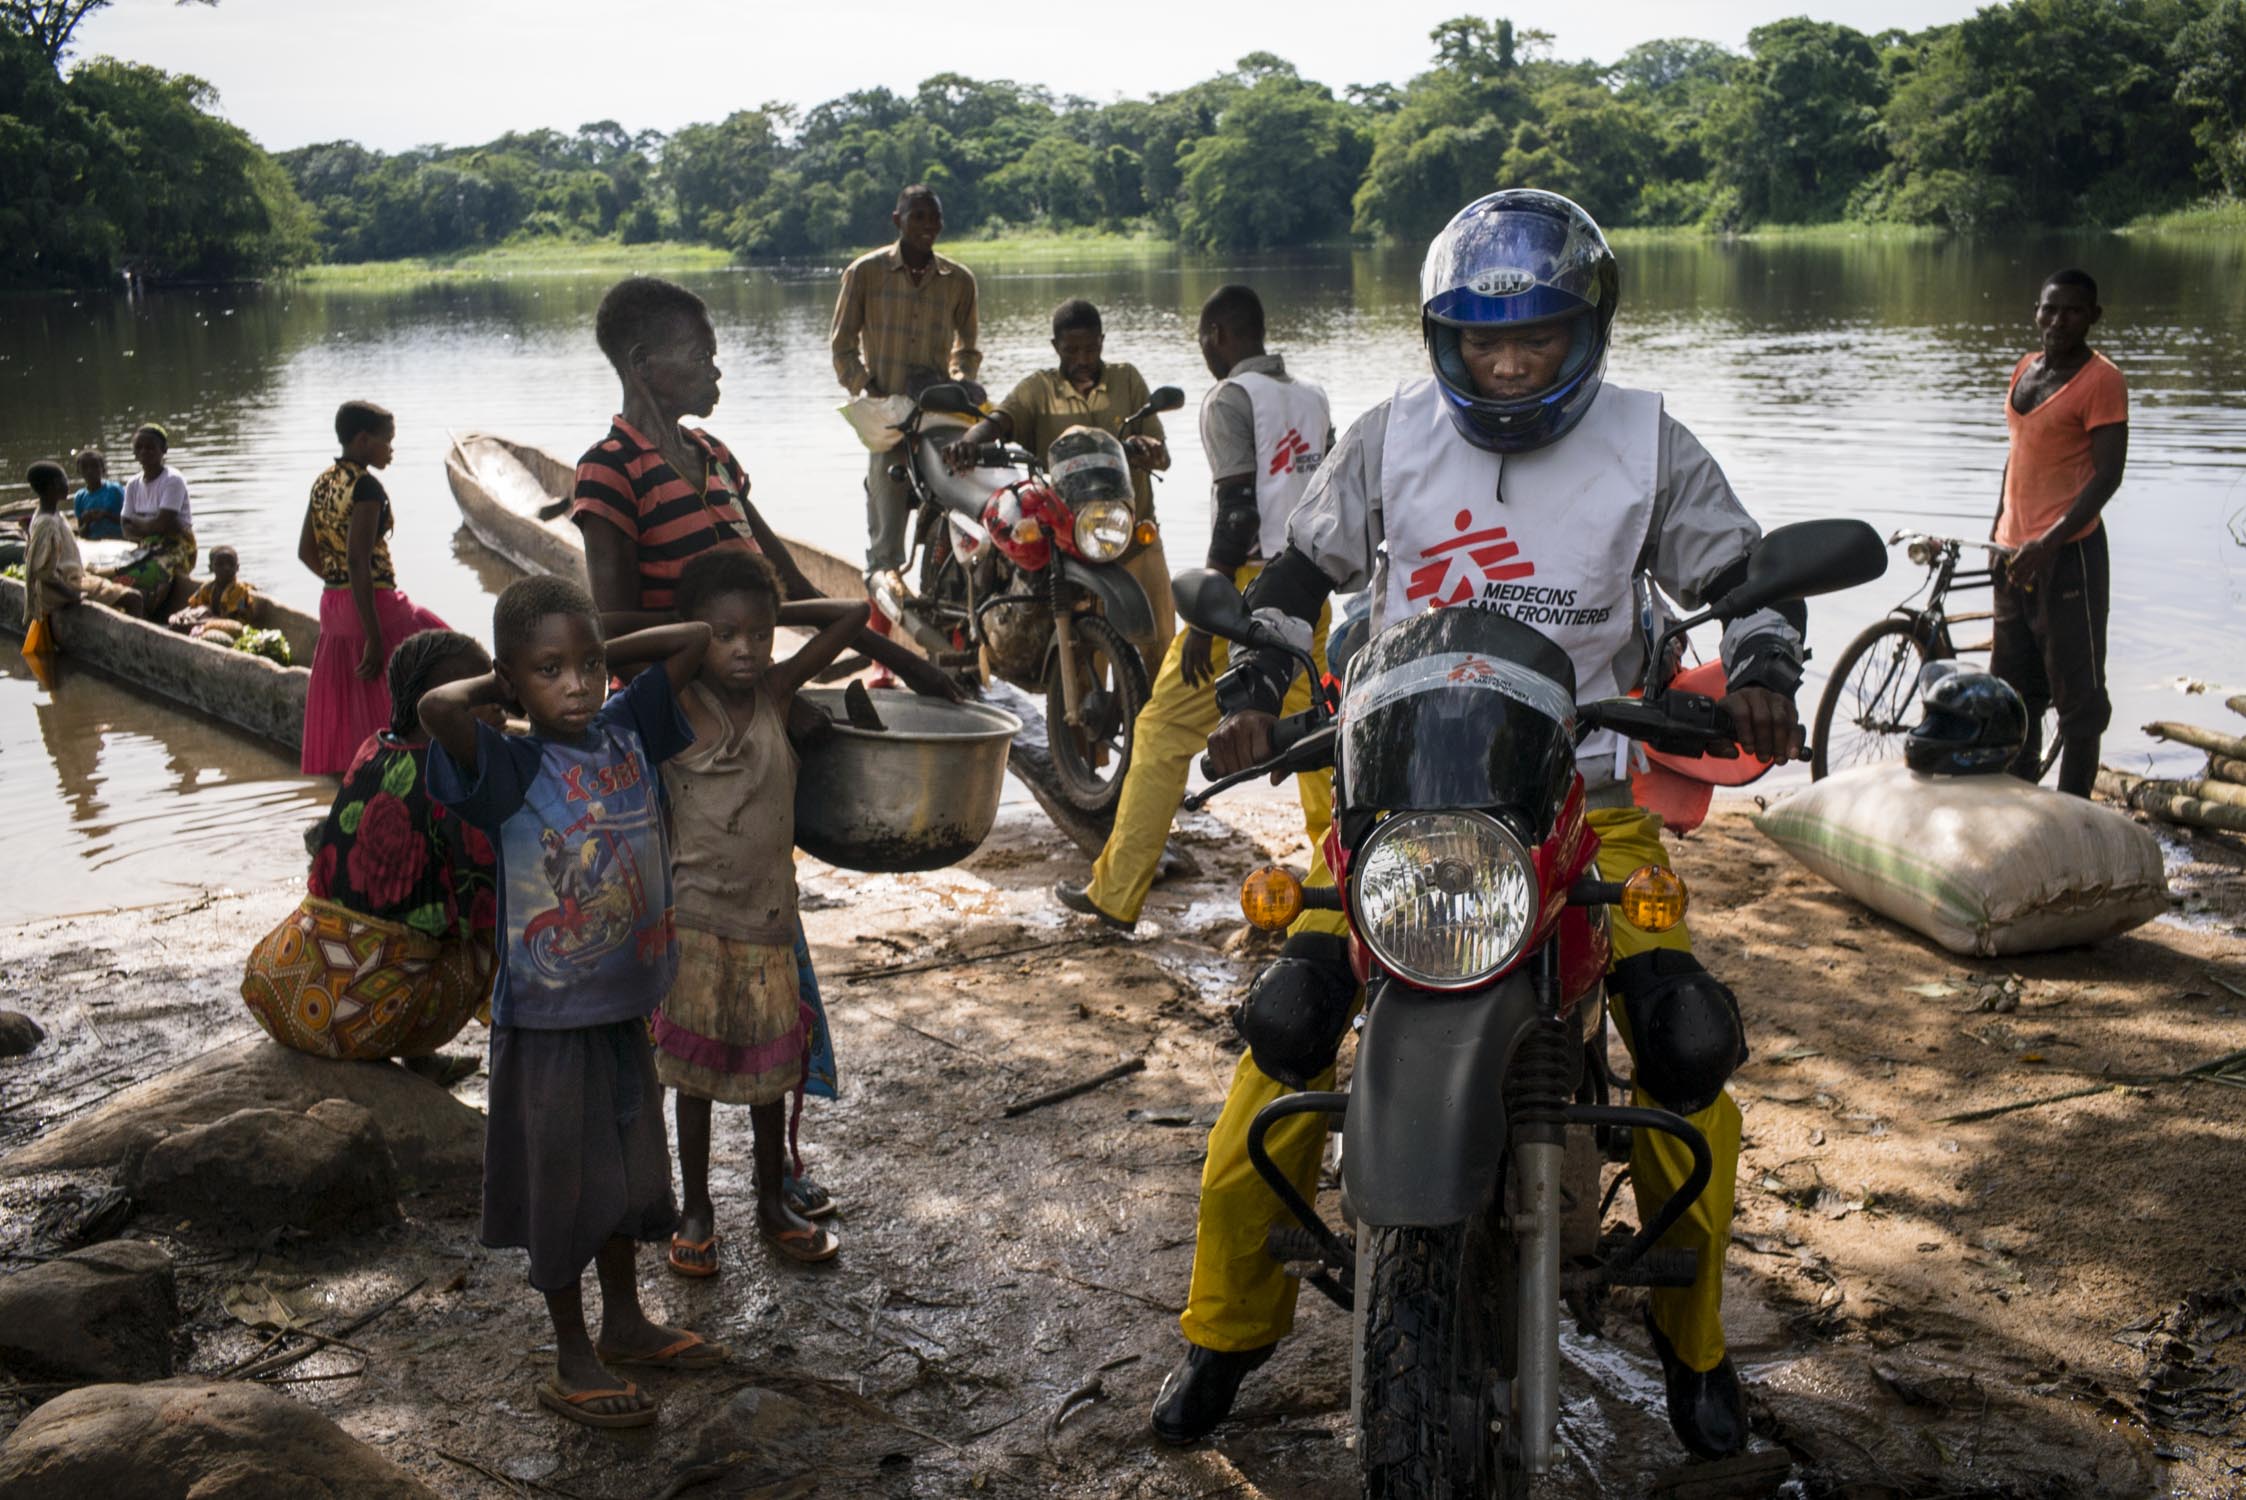  MSF drivers disembark their motorcycles from the local  pirogues  (traditional canoes)&nbsp;used to cross a river on their journey to a health center in Sombe, a village in the remote Bas-Uele province of Democratic Republic of the Congo (DRC). MSF 